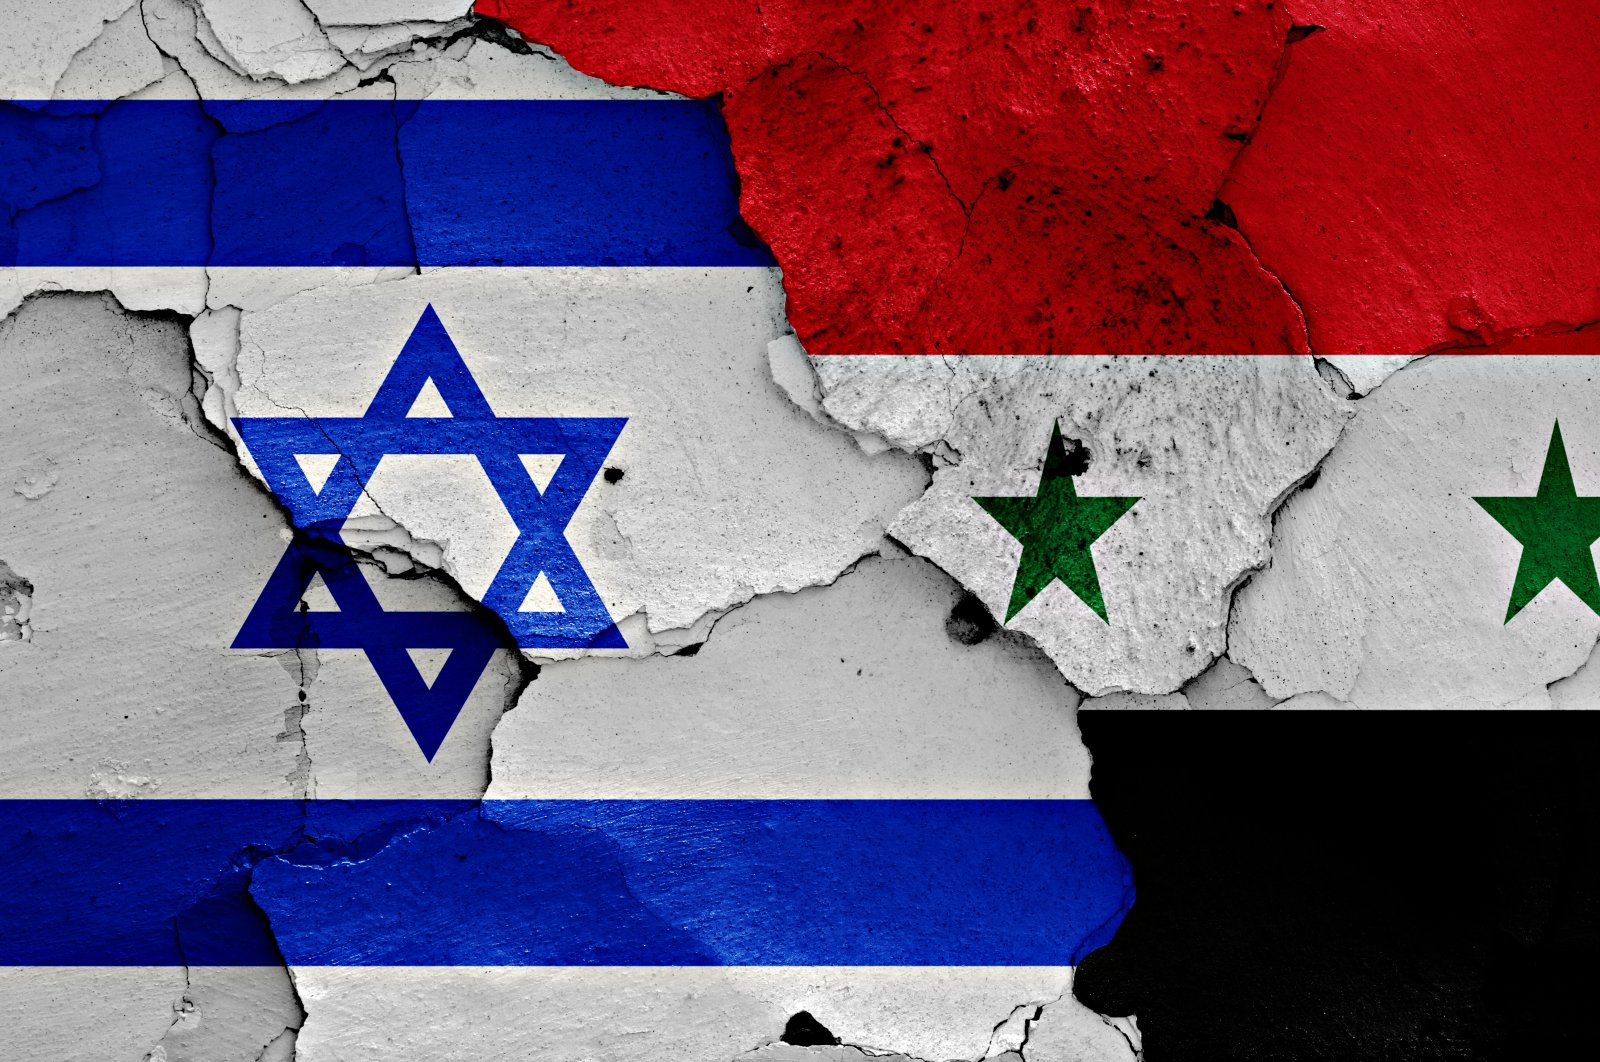 The flags of Israel and Syria are seen on a cracked wall. (ShutterStock Photo)